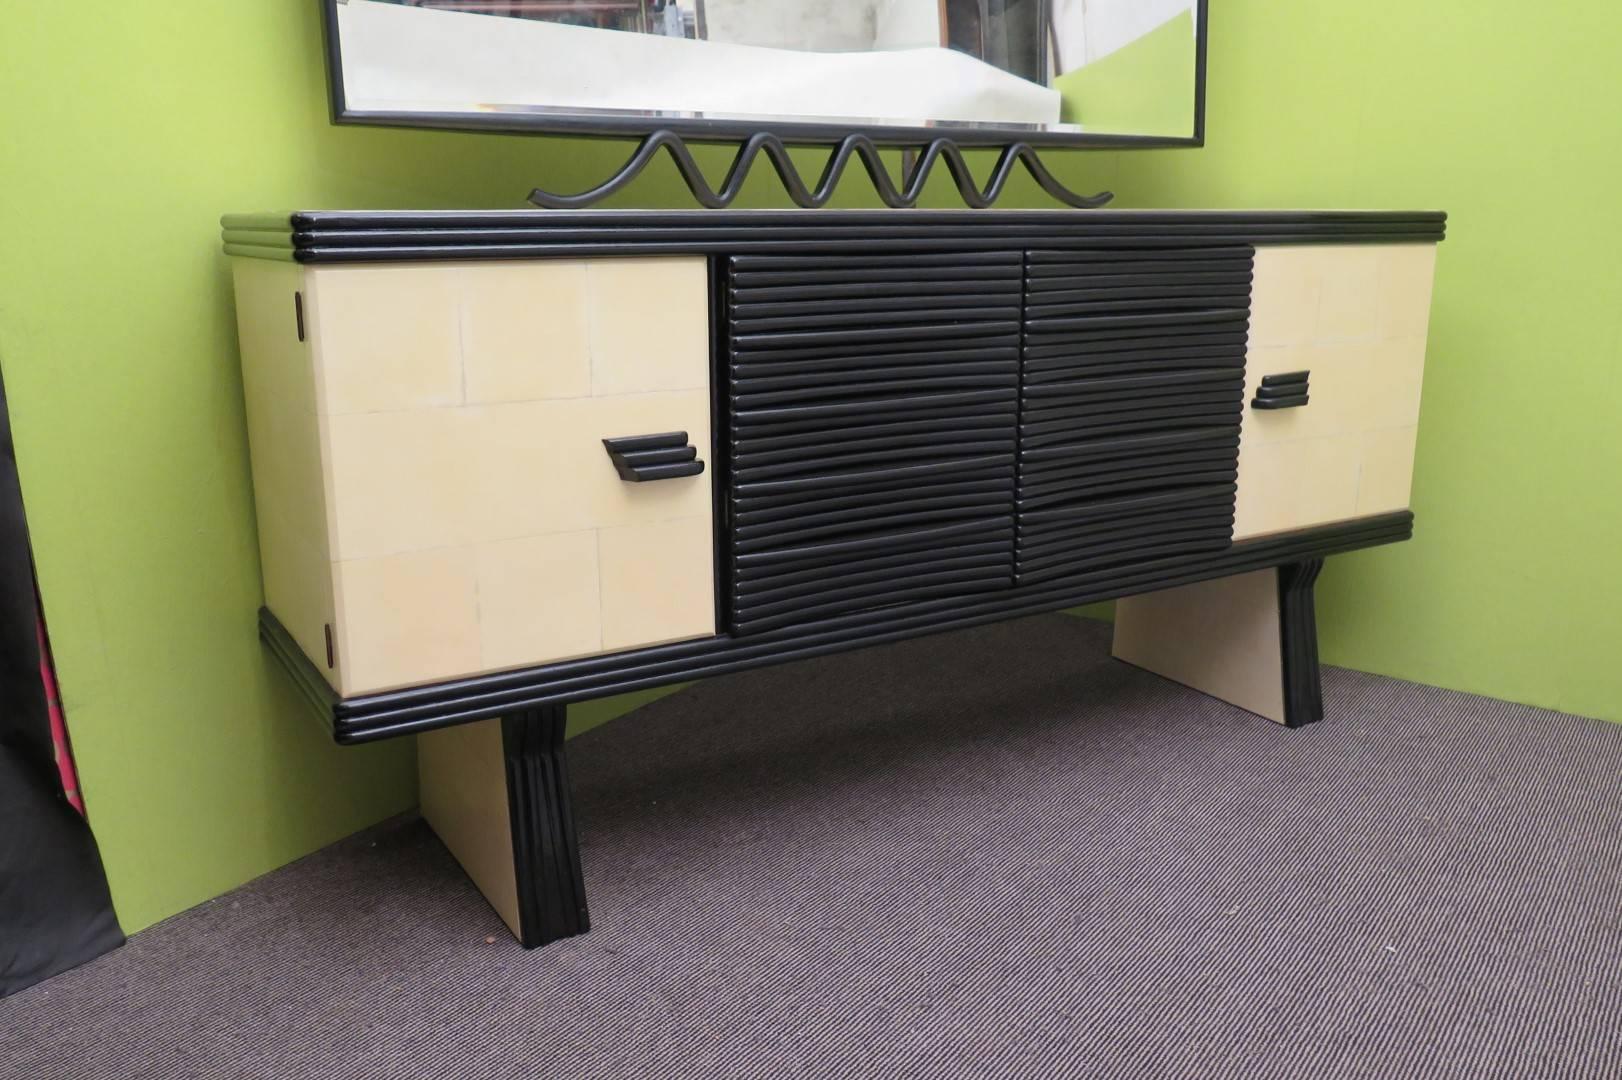 Taste and Italian flavor for this typical sideboard of Pier Luigi Colli. Classic in his design but very refined in the process of working of the materials.

The sideboard consists of two side doors, and two central doors with two drawers underneath.